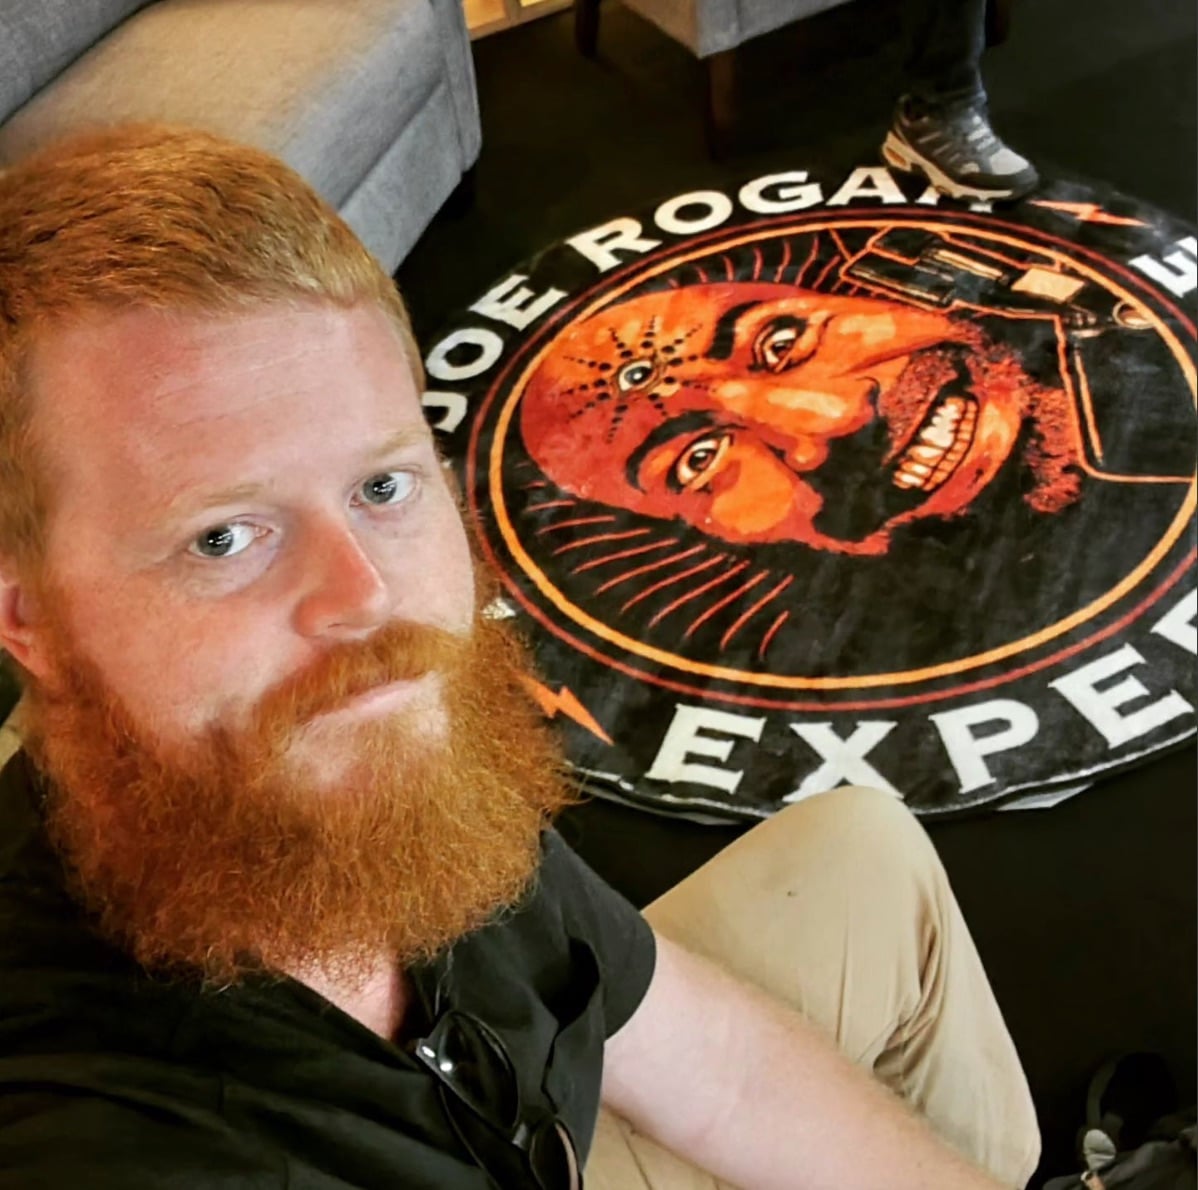 Oliver Anthony visiting to film the Joe Rogan Experience Podcast